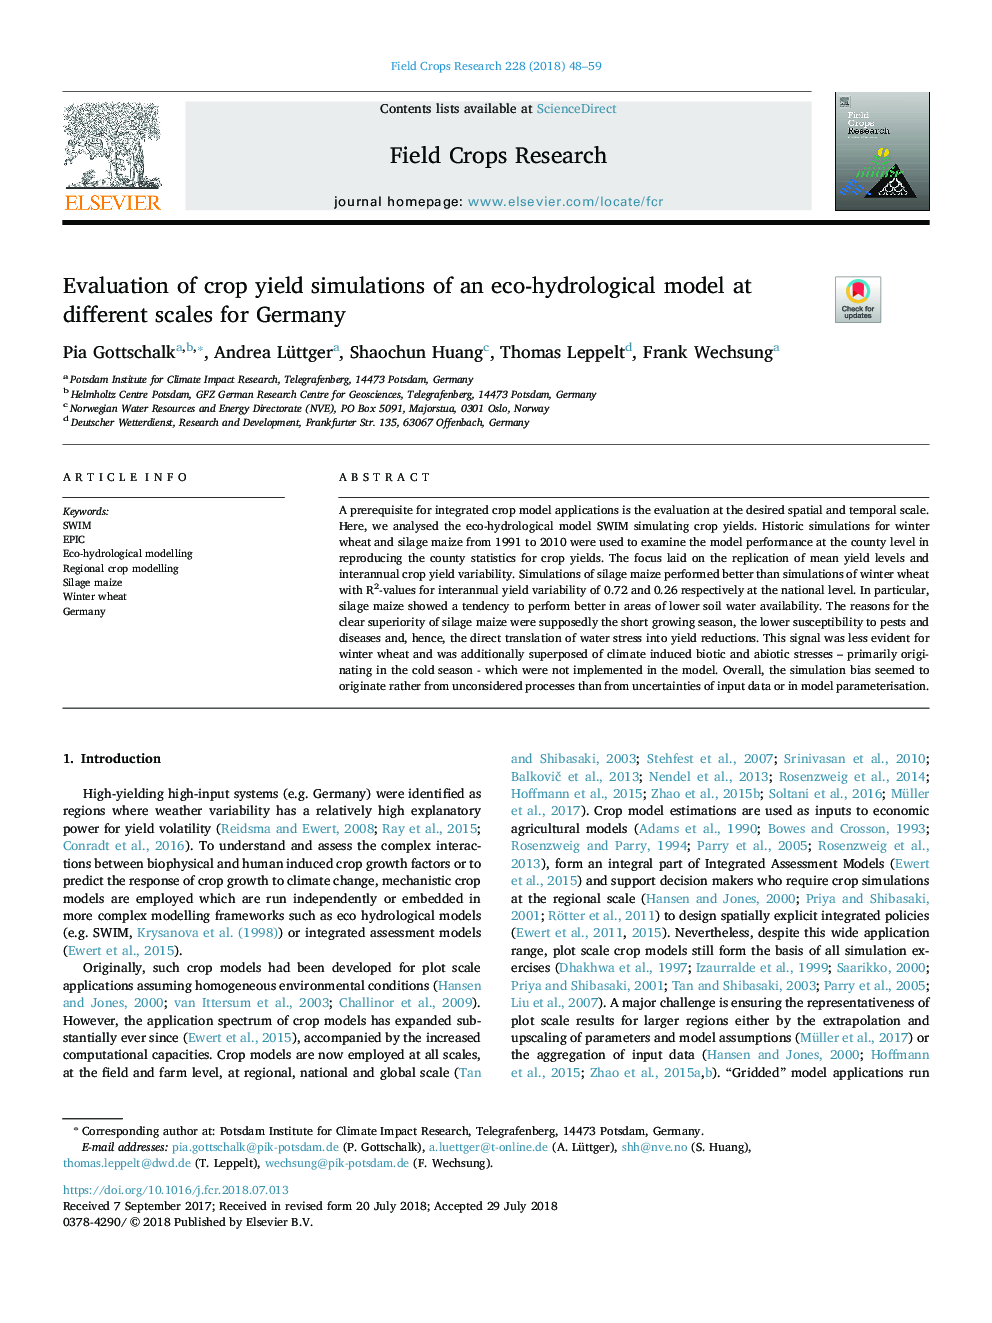 Evaluation of crop yield simulations of an eco-hydrological model at different scales for Germany